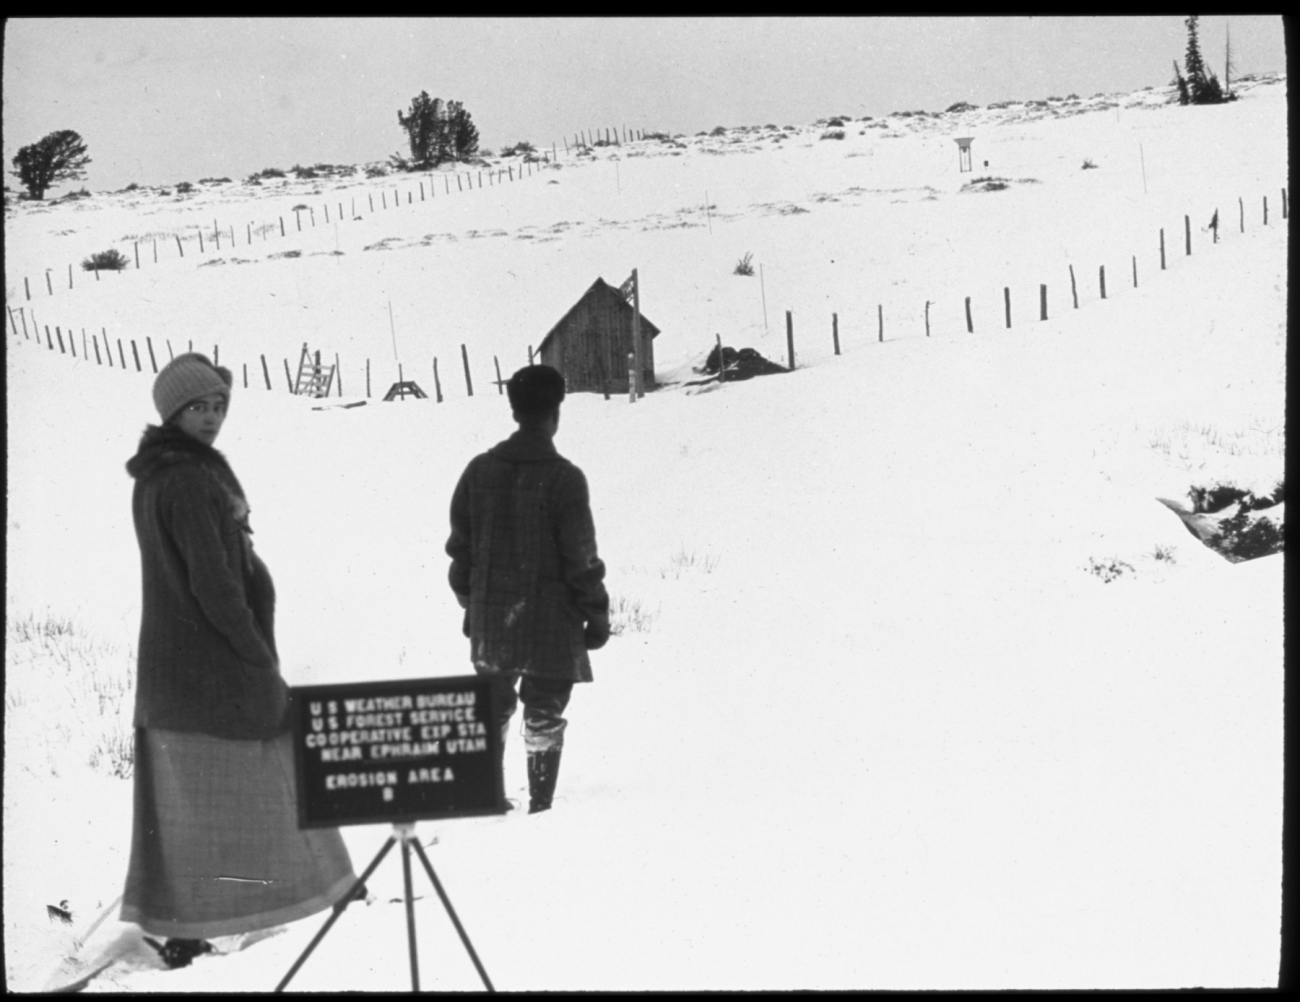 Weather Bureau observer and wife on snowshoes approaching the Weather Bureau/Forest Service cooperative site outside of Ephriam, Utah, for snowobservations